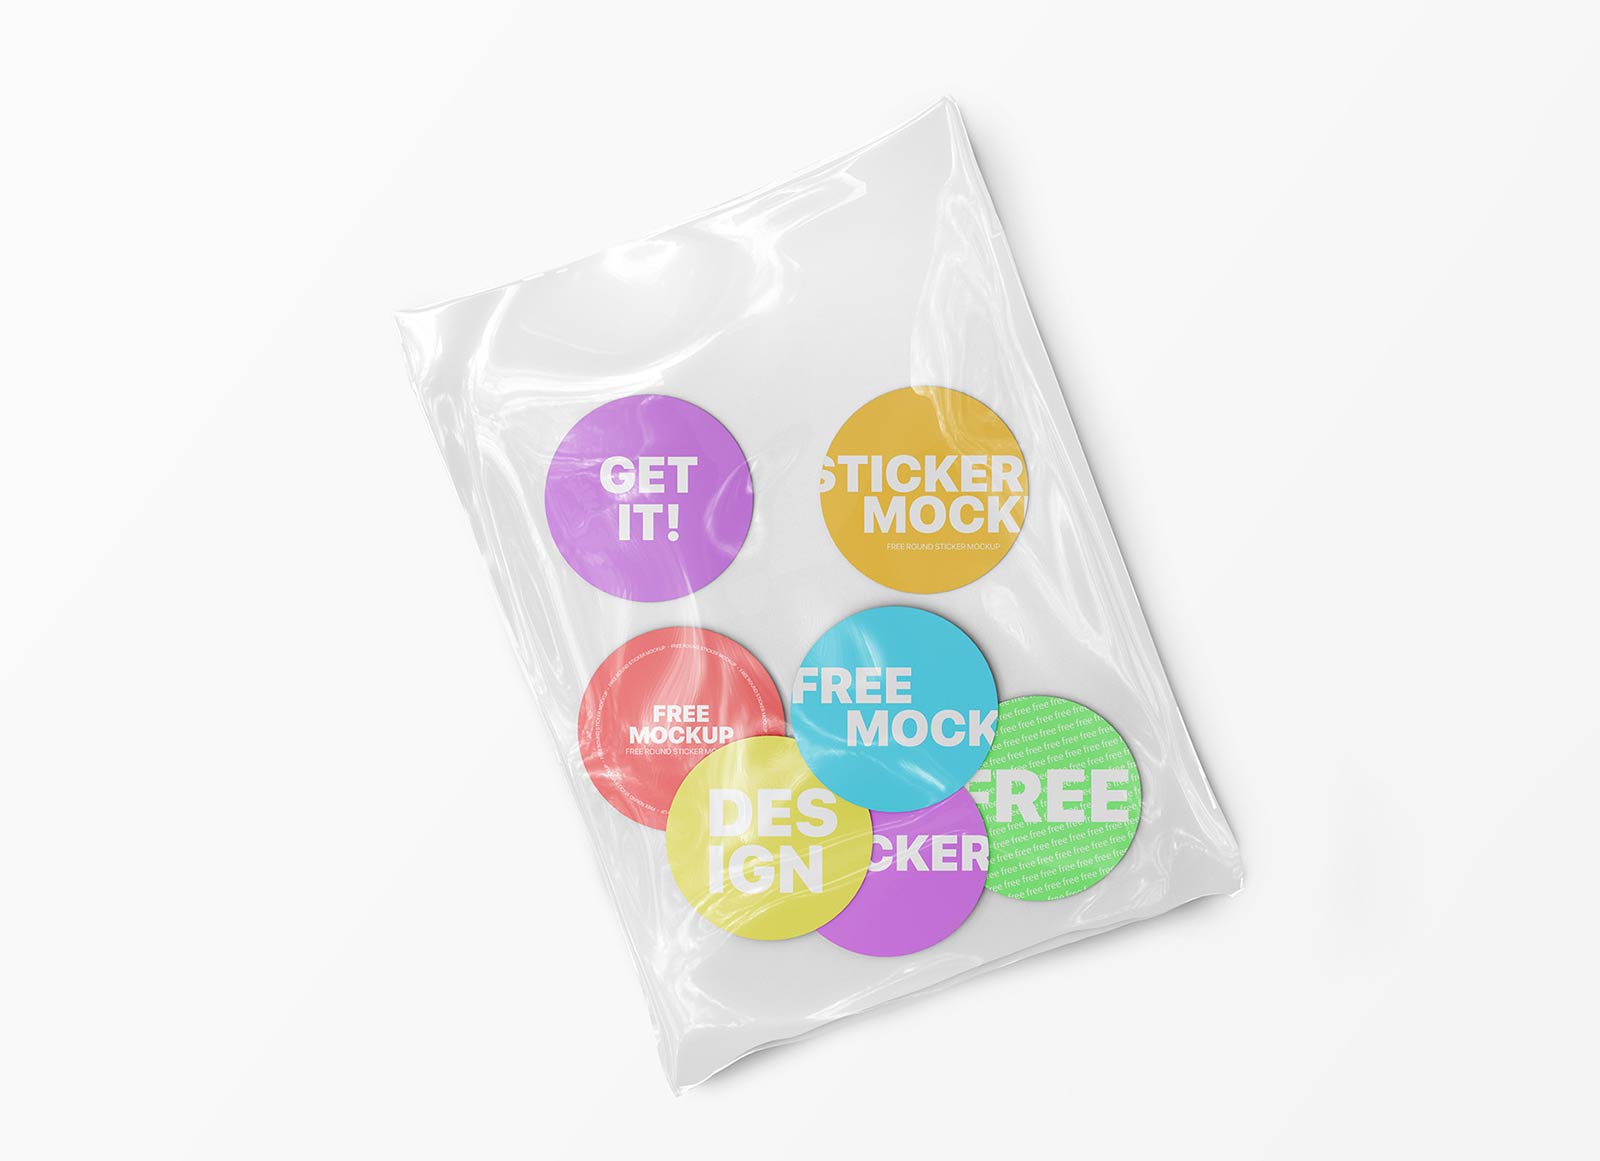 Free-Round-Stickers-in-Sachet-Packaging-Mockup-PSD